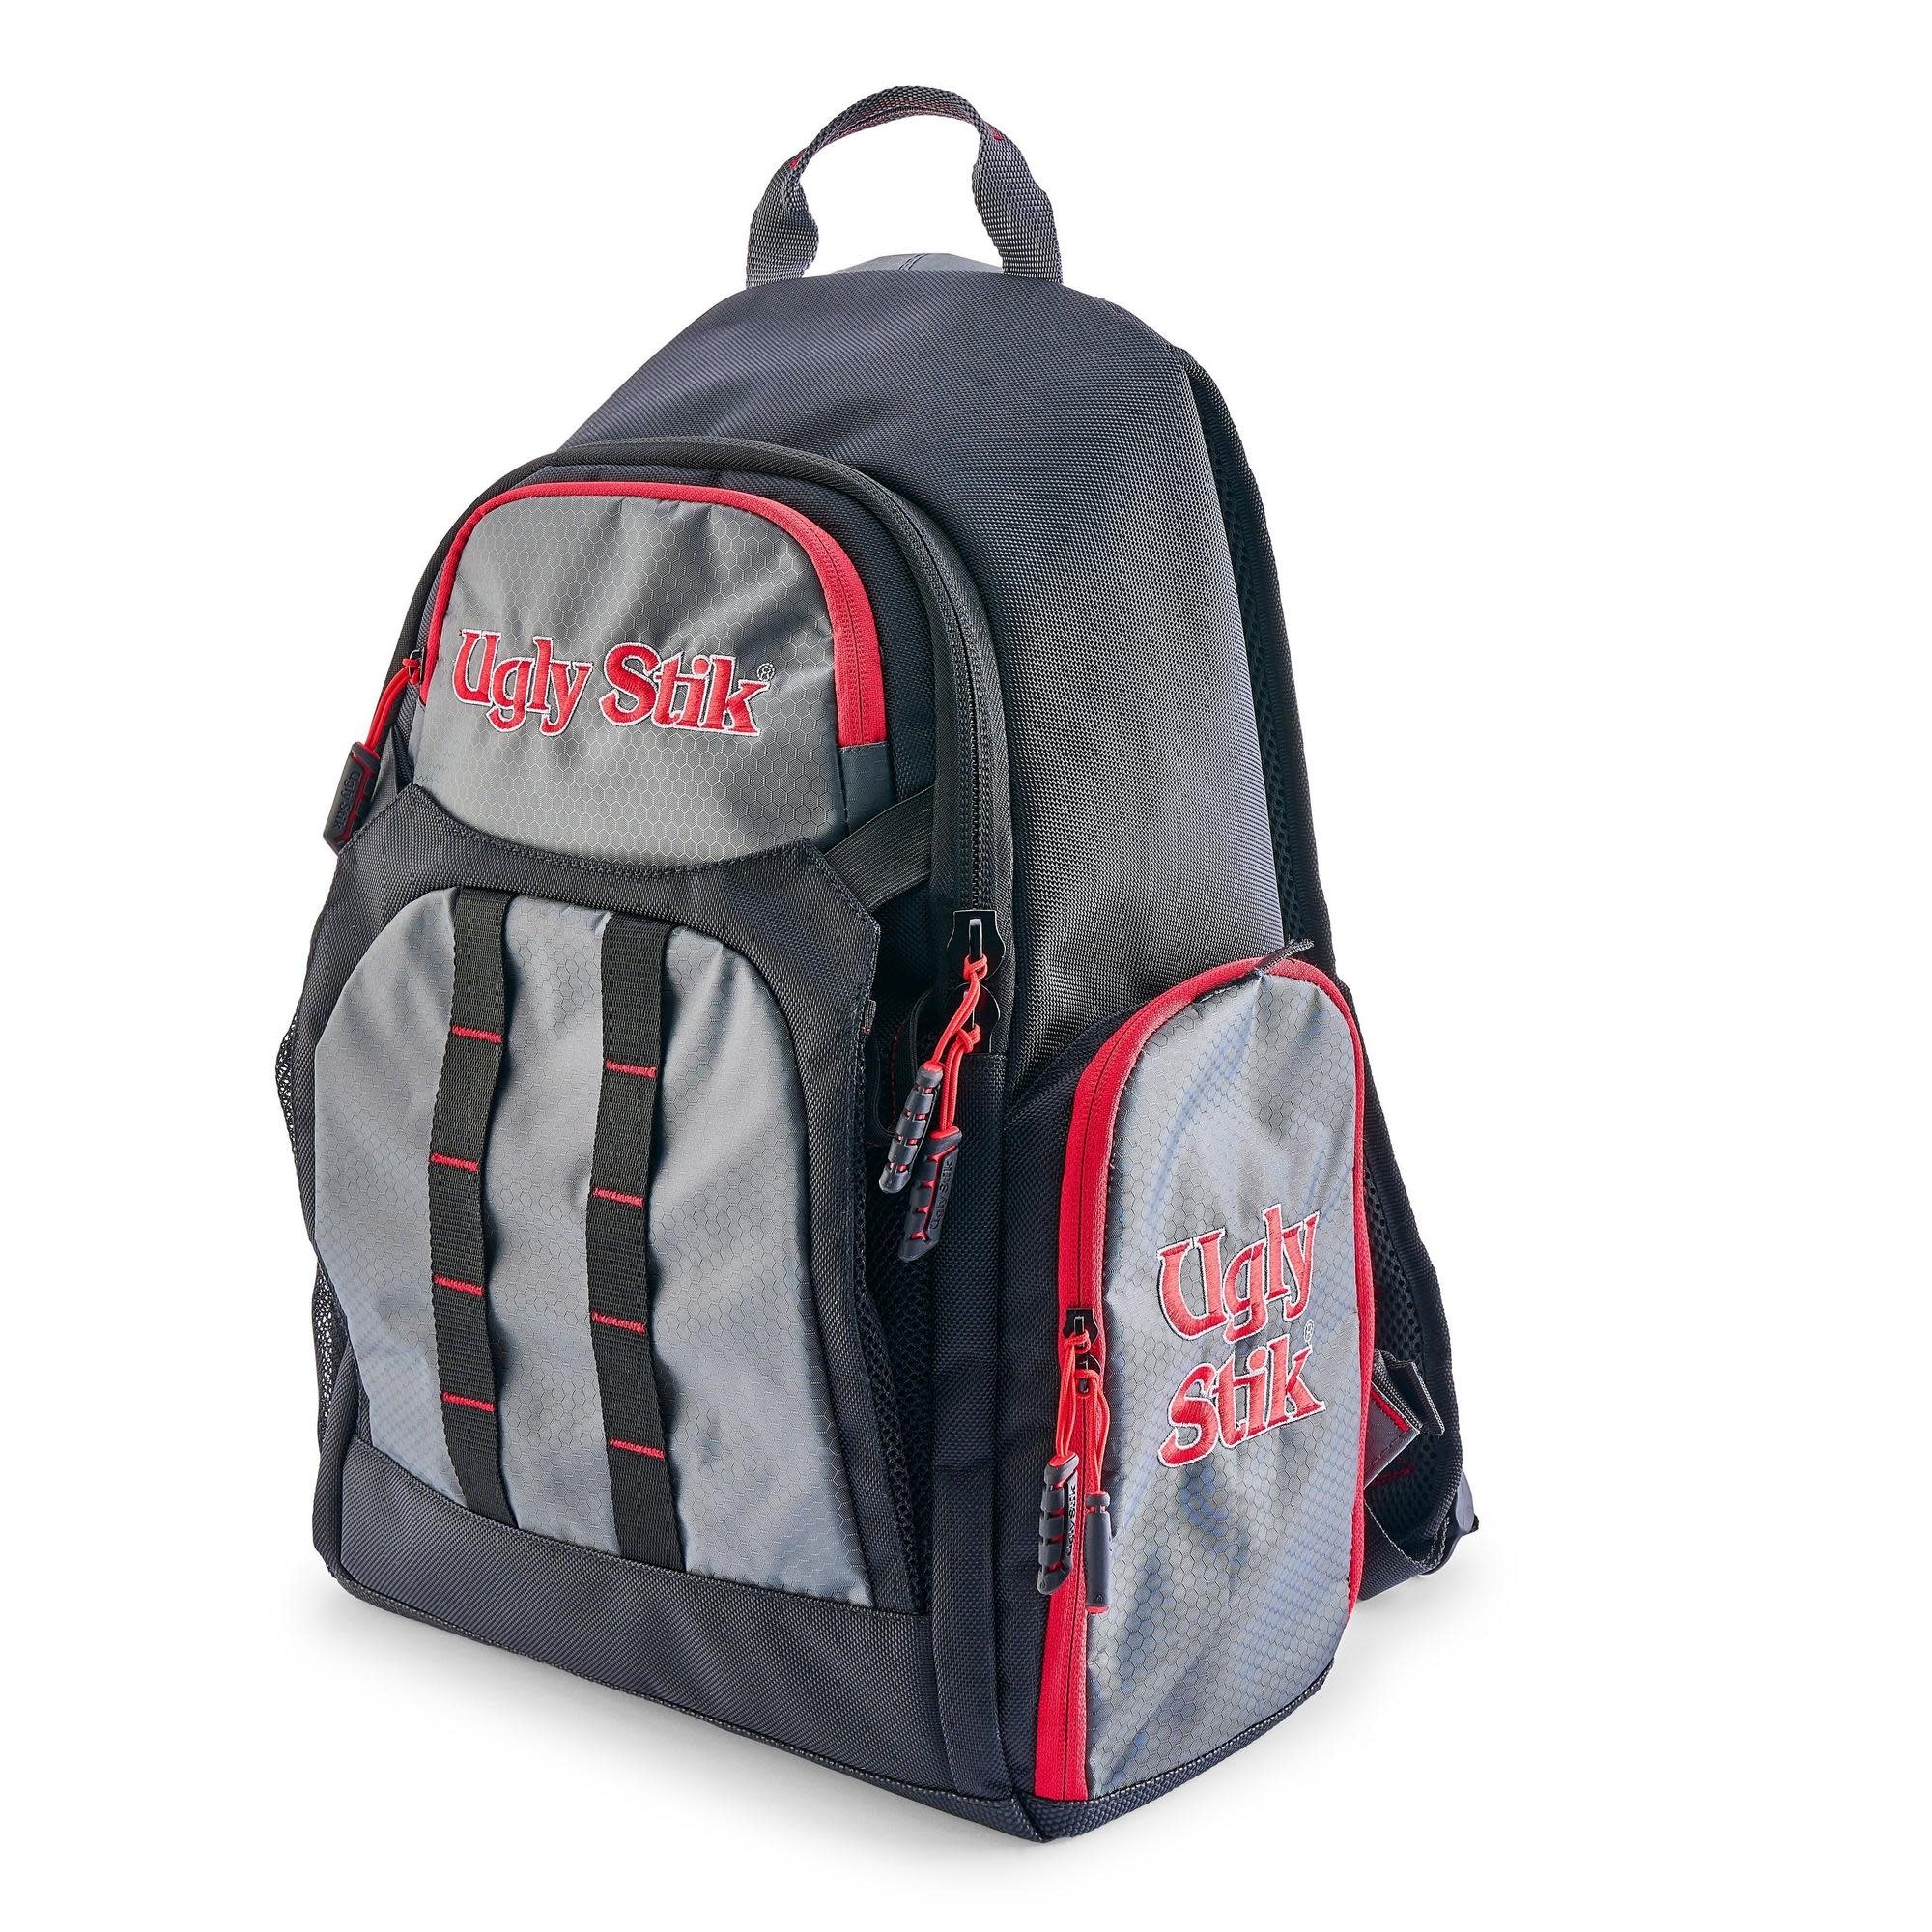 Plano Ugly Stik 3600 Backpack - Gagnon Sporting Goods